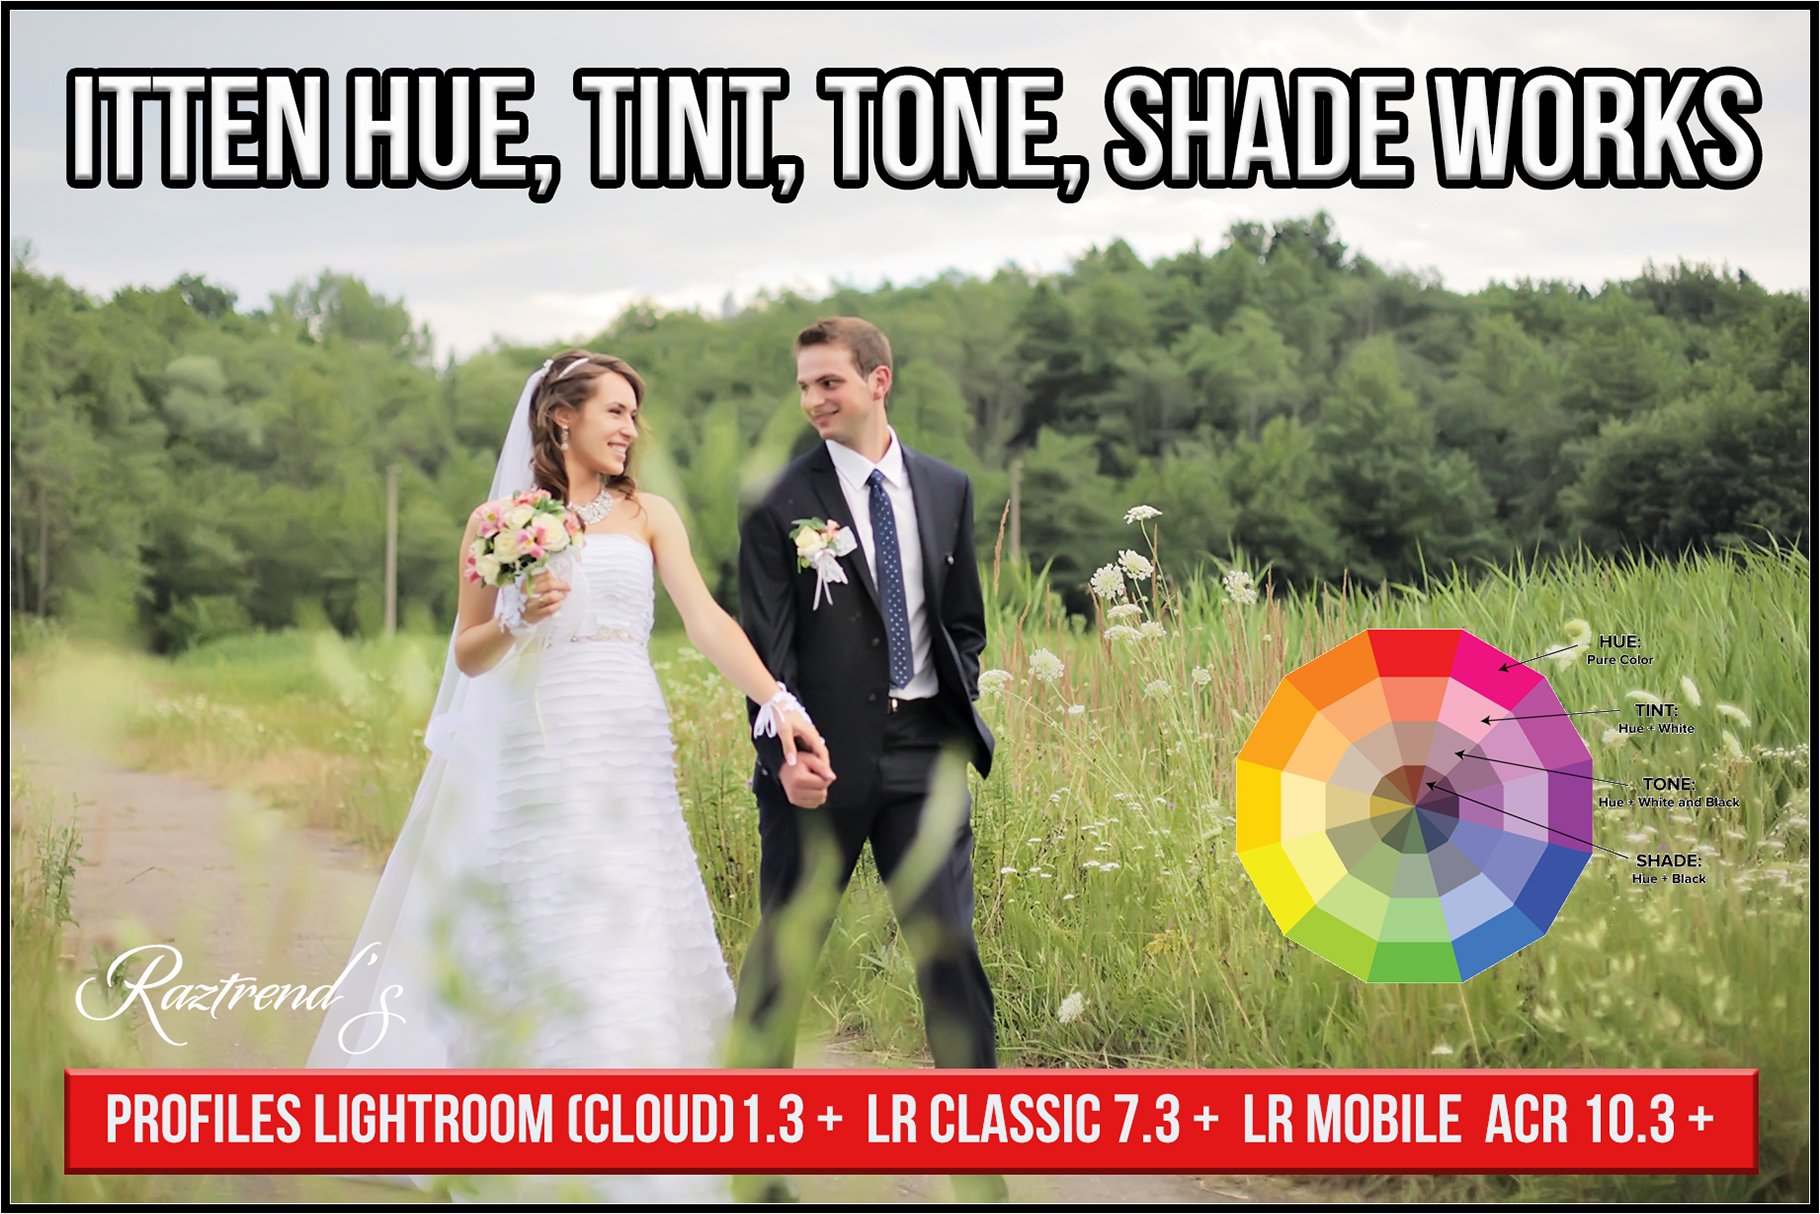 Itten Hue, Tint, Tone, Shade Workscover image.